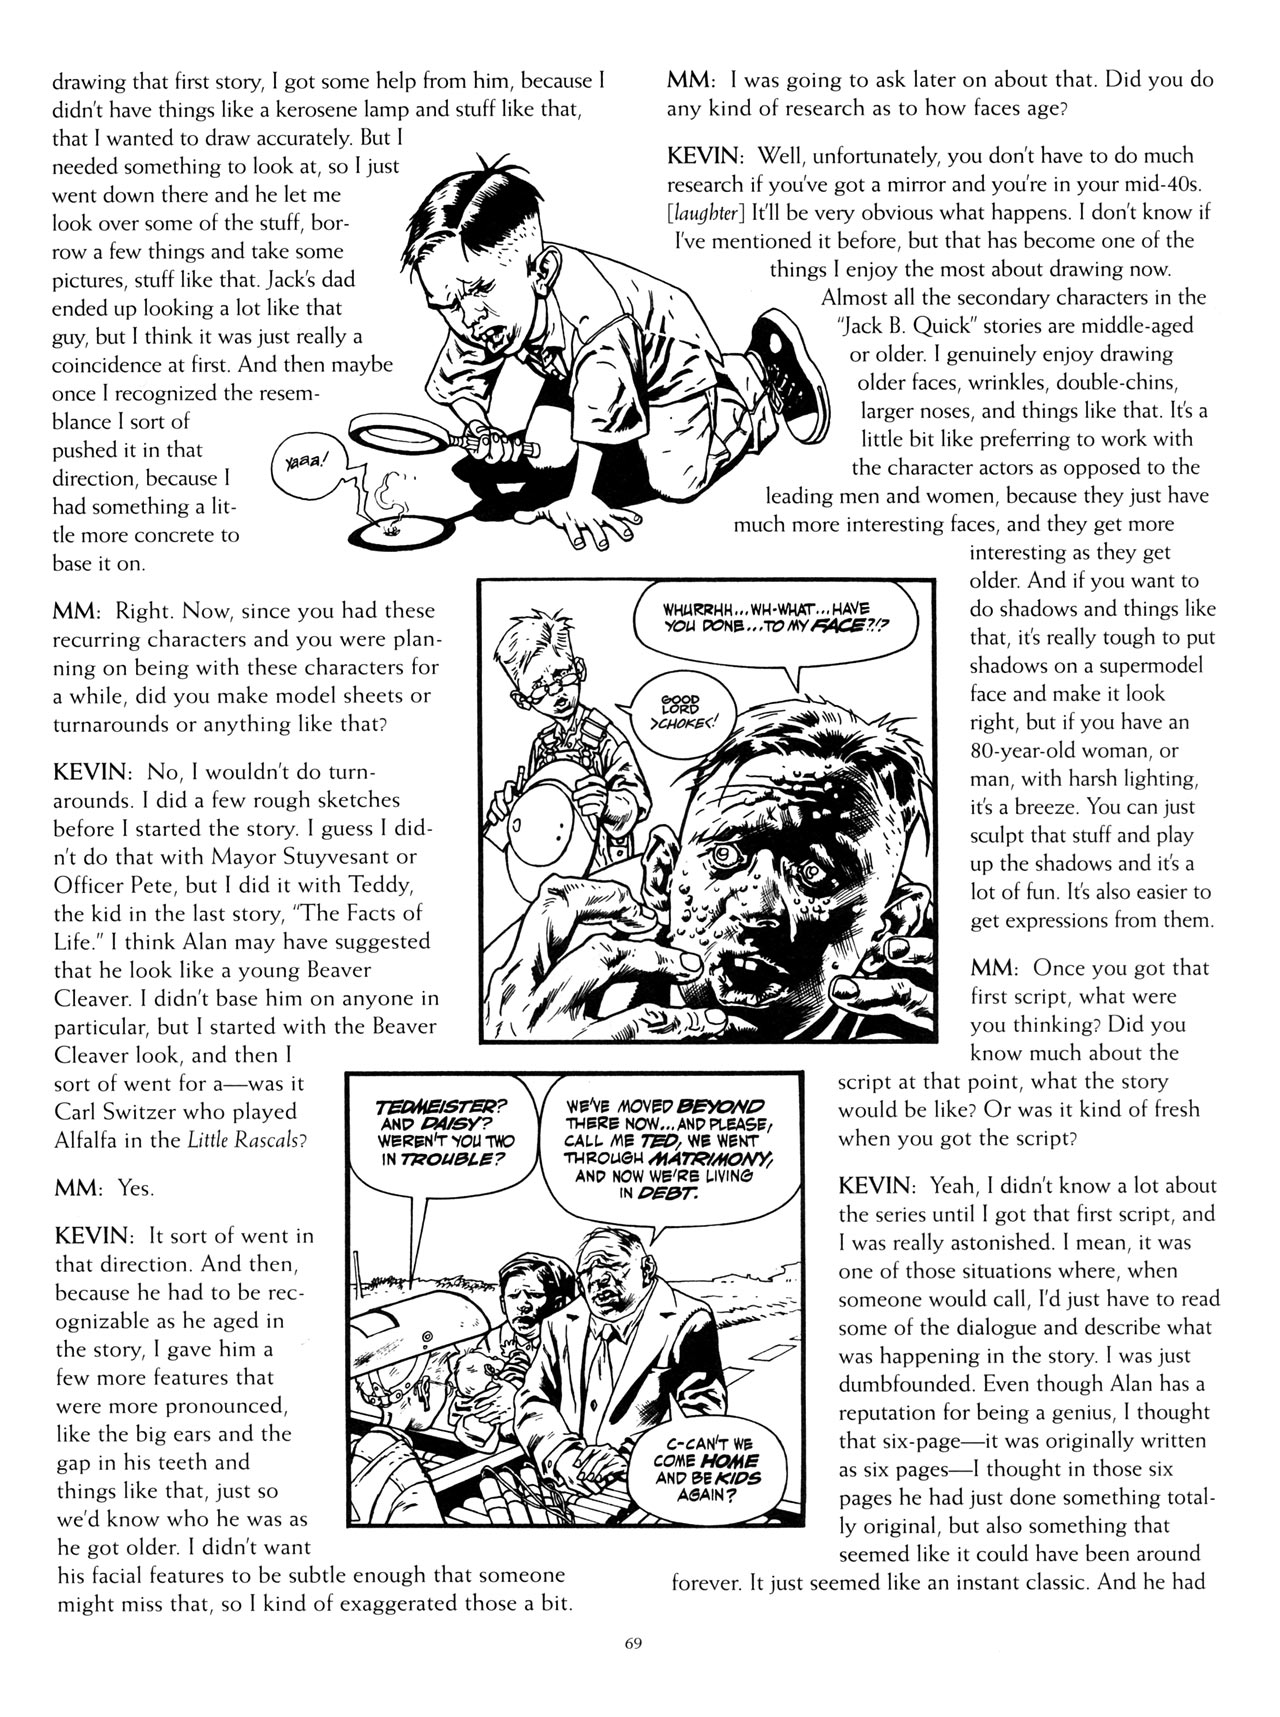 Read online Modern Masters comic -  Issue #4 - 70